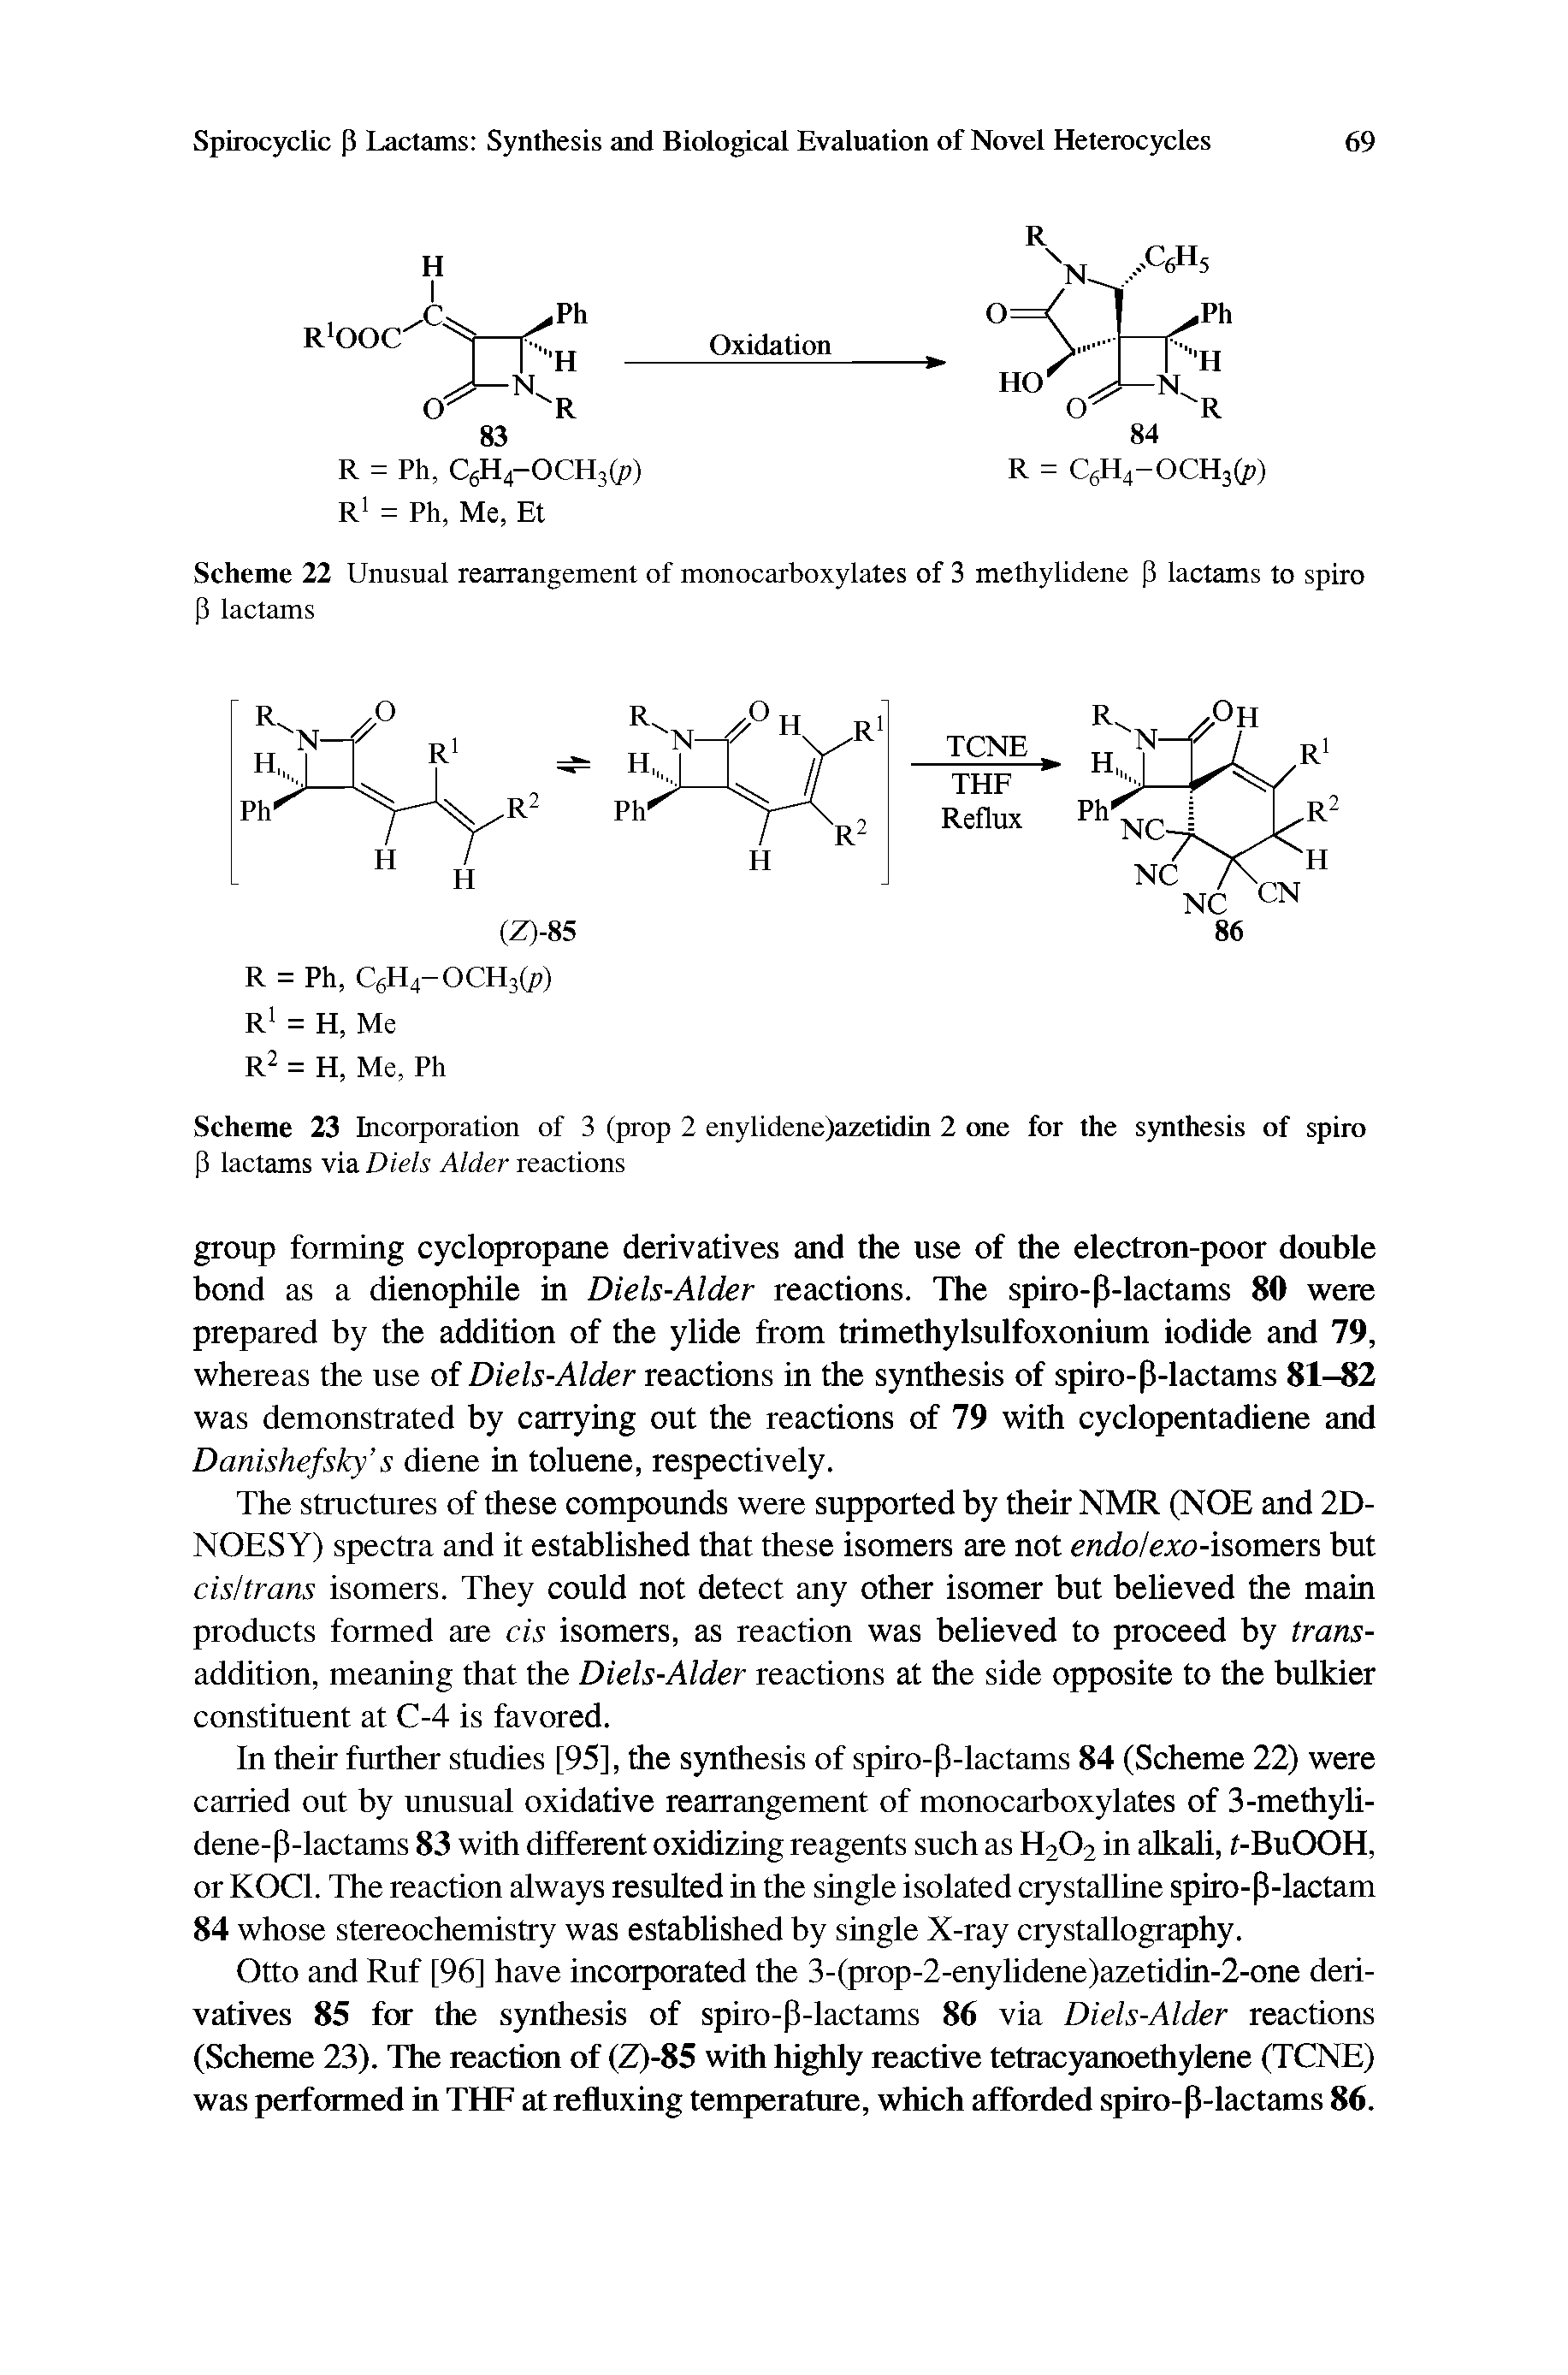 Scheme 23 Incorporation of 3 (prop 2 enylidene)azetidin 2 one for the synthesis of spiro P lactams via Diels Alder reactions...